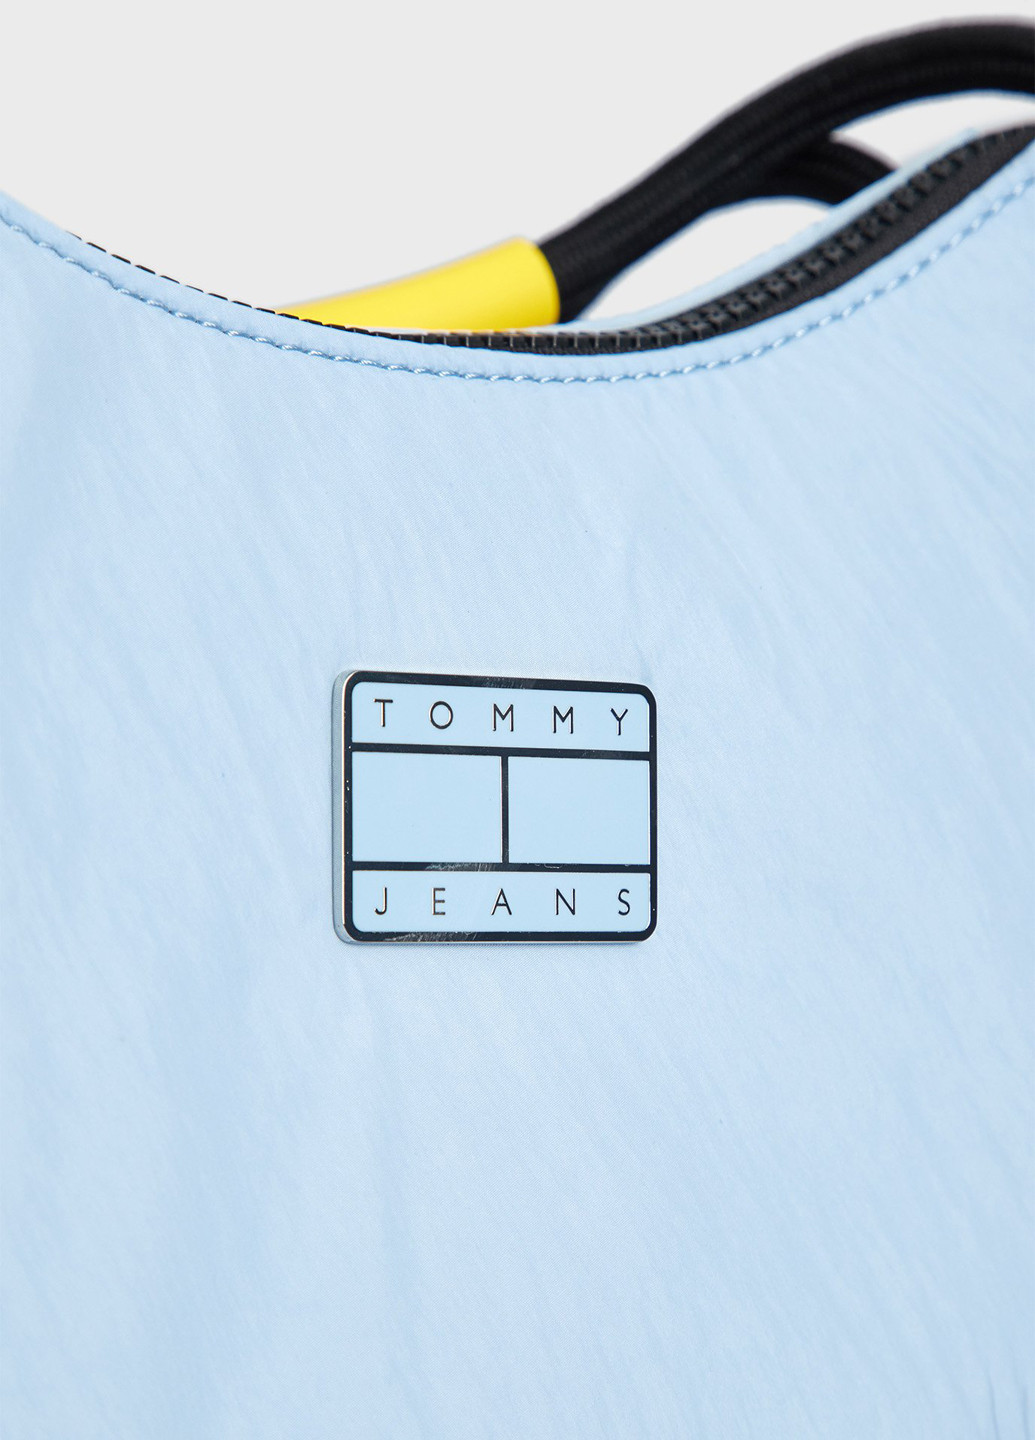 Сумка Tommy Jeans (275086426)